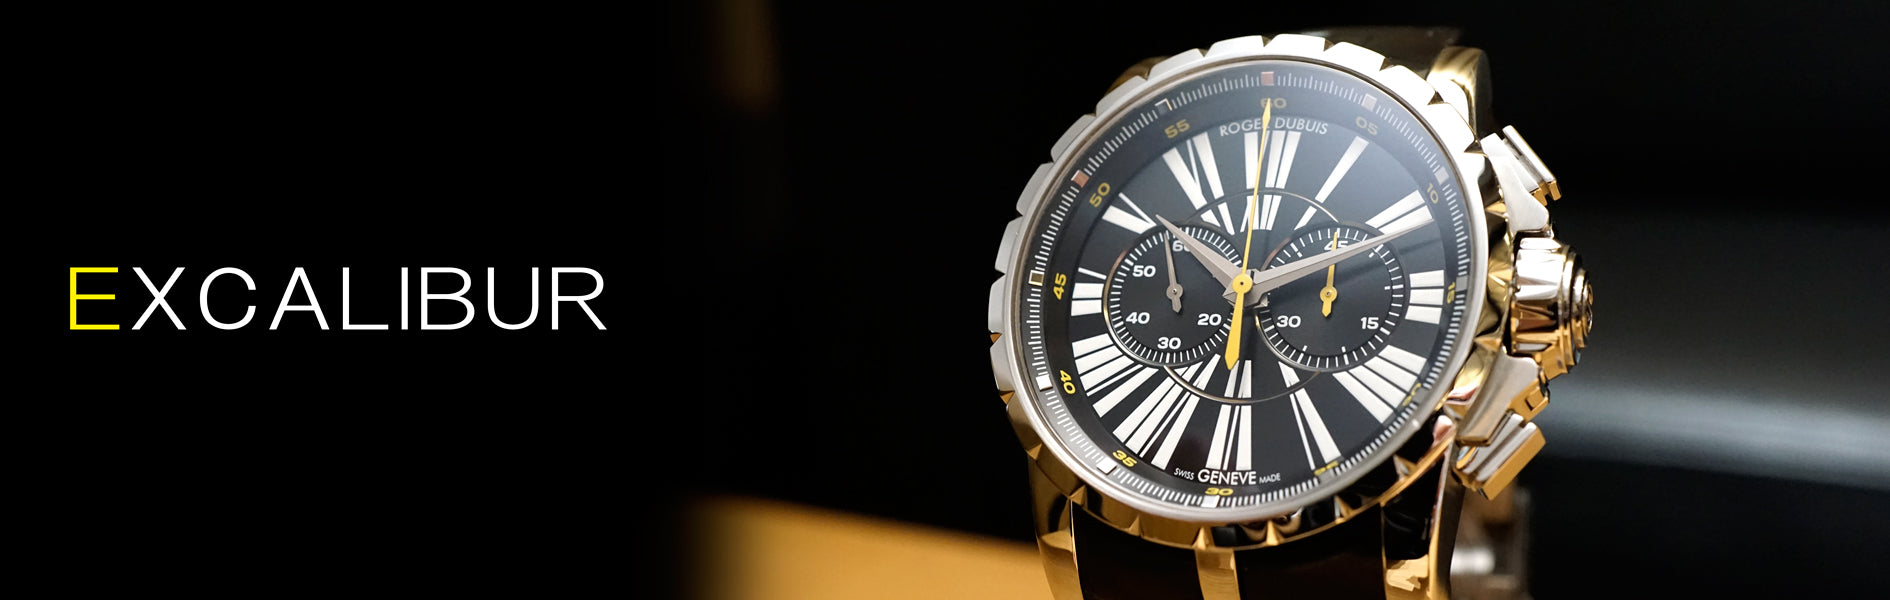 Roger Dubuis Excalibur Inventory List